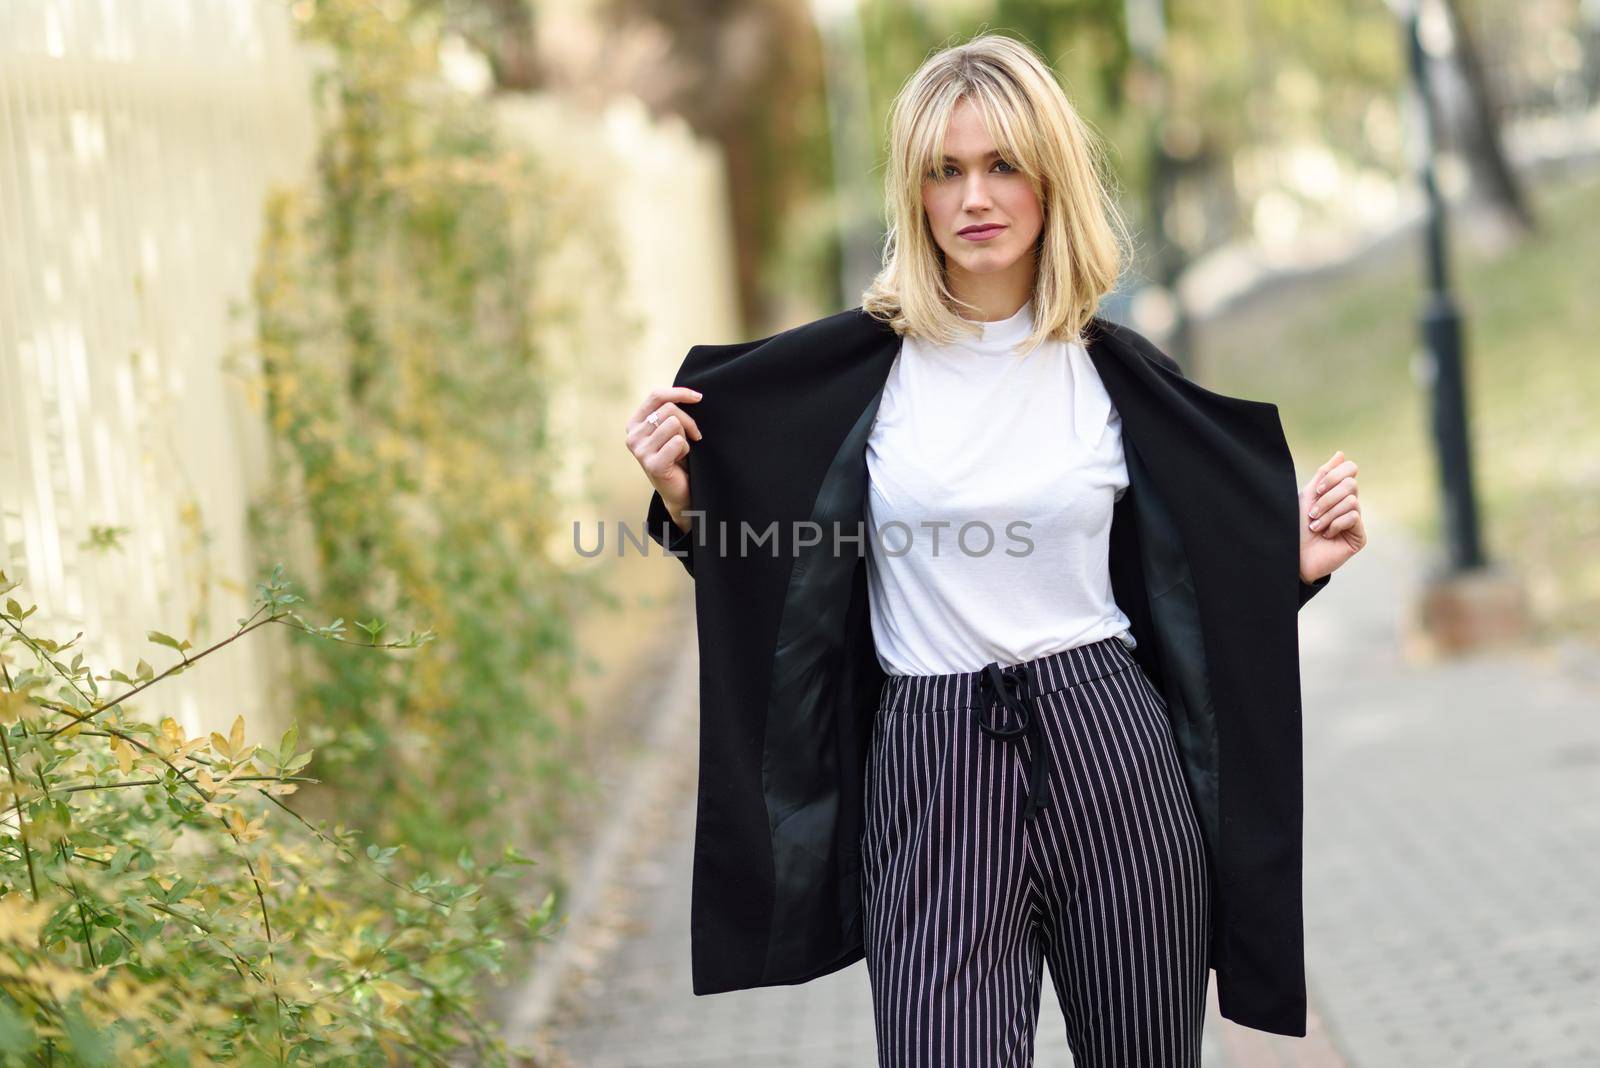 Beautiful young blonde woman in urban background by javiindy